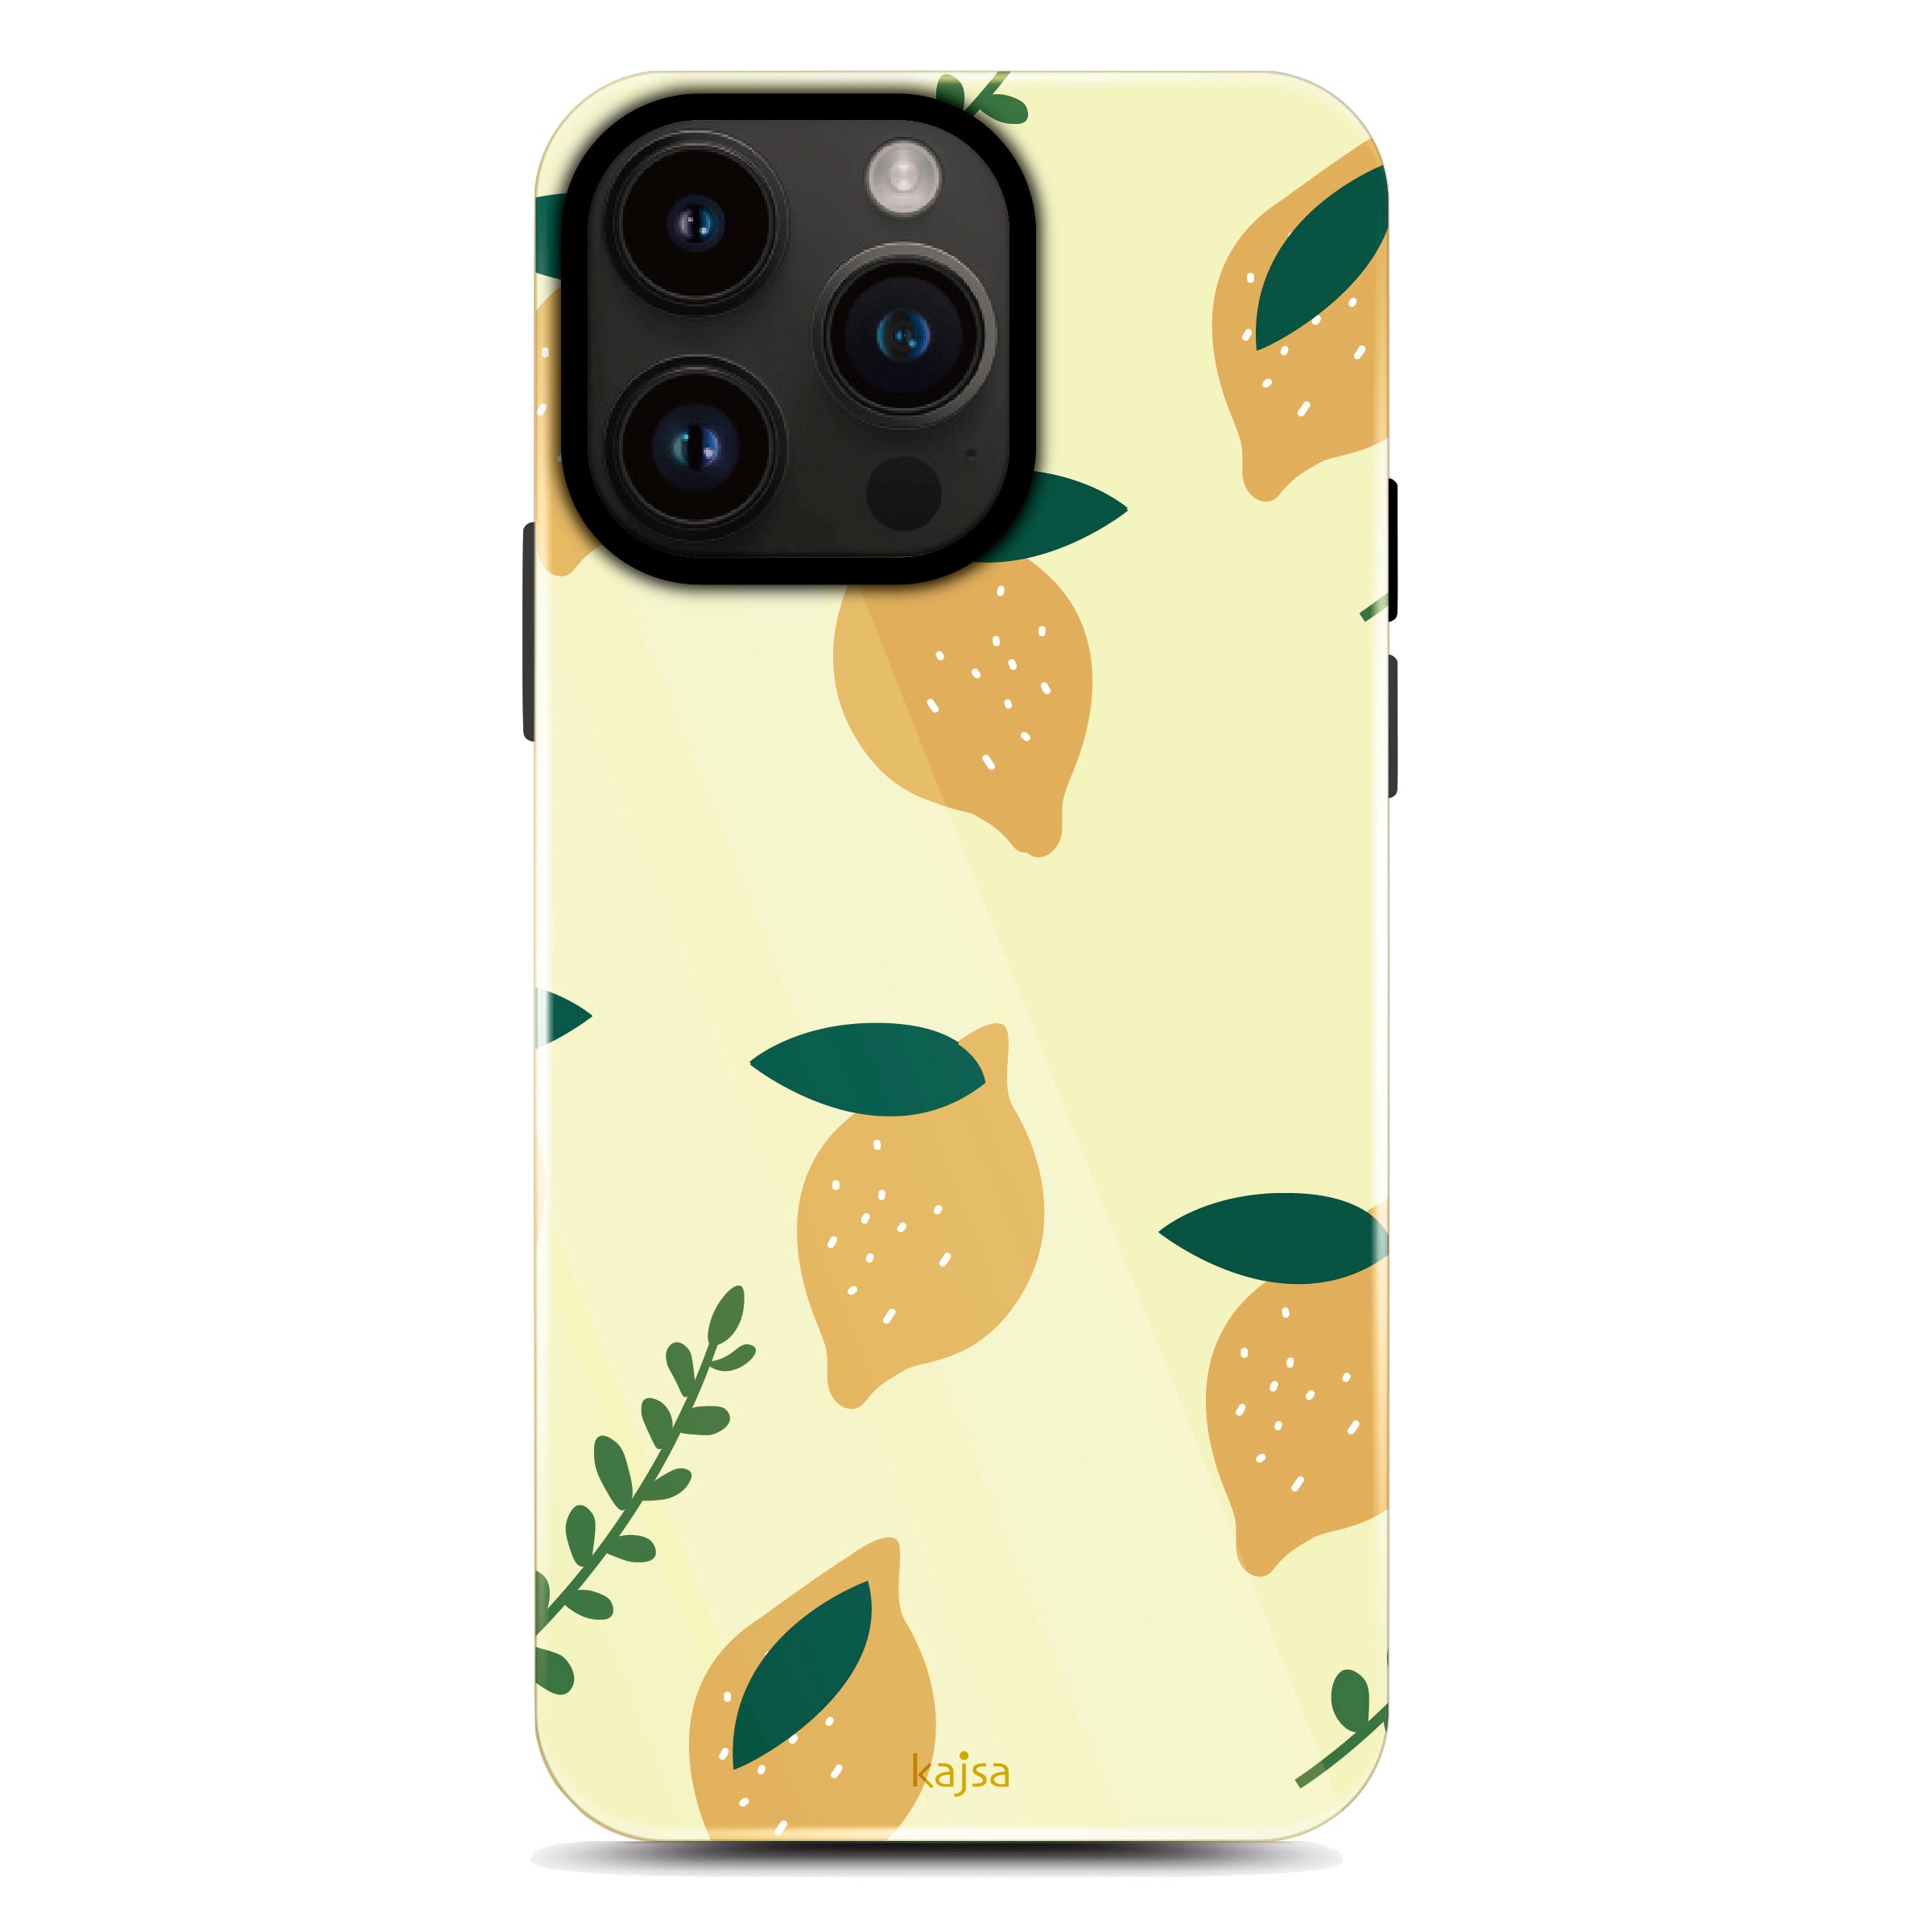 Floral Collection - Tropical Back Base for iPhone 14 (TY1)-Phone Case- phone case - phone cases- phone cover- iphone cover- iphone case- iphone cases- leather case- leather cases- DIYCASE - custom case - leather cover - hand strap case - croco pattern case - snake pattern case - carbon fiber phone case - phone case brand - unique phone case - high quality - phone case brand - protective case - buy phone case hong kong - online buy phone case - iphone‎手機殼 - 客製化手機殼 - samsung ‎手機殼 - 香港手機殼 - 買電話殼